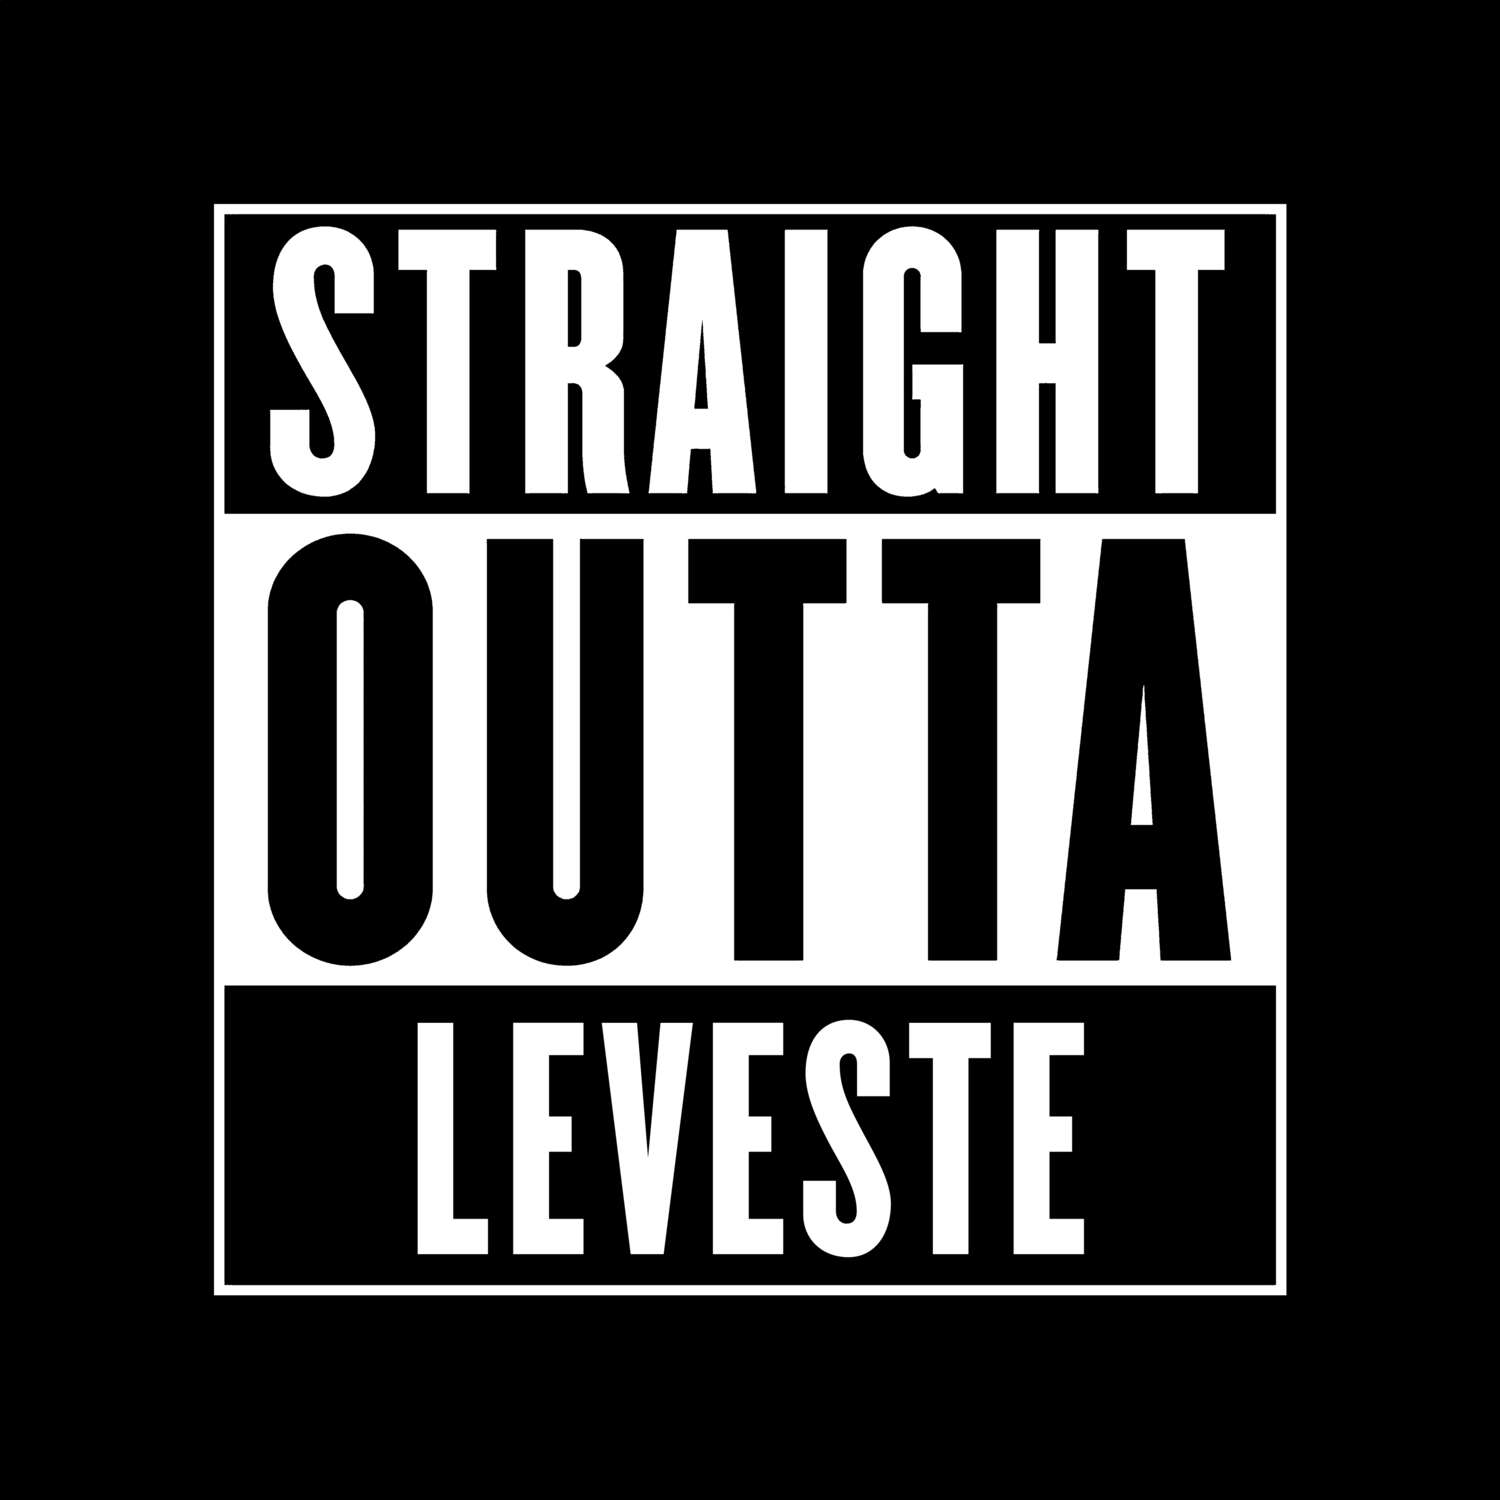 Leveste T-Shirt »Straight Outta«